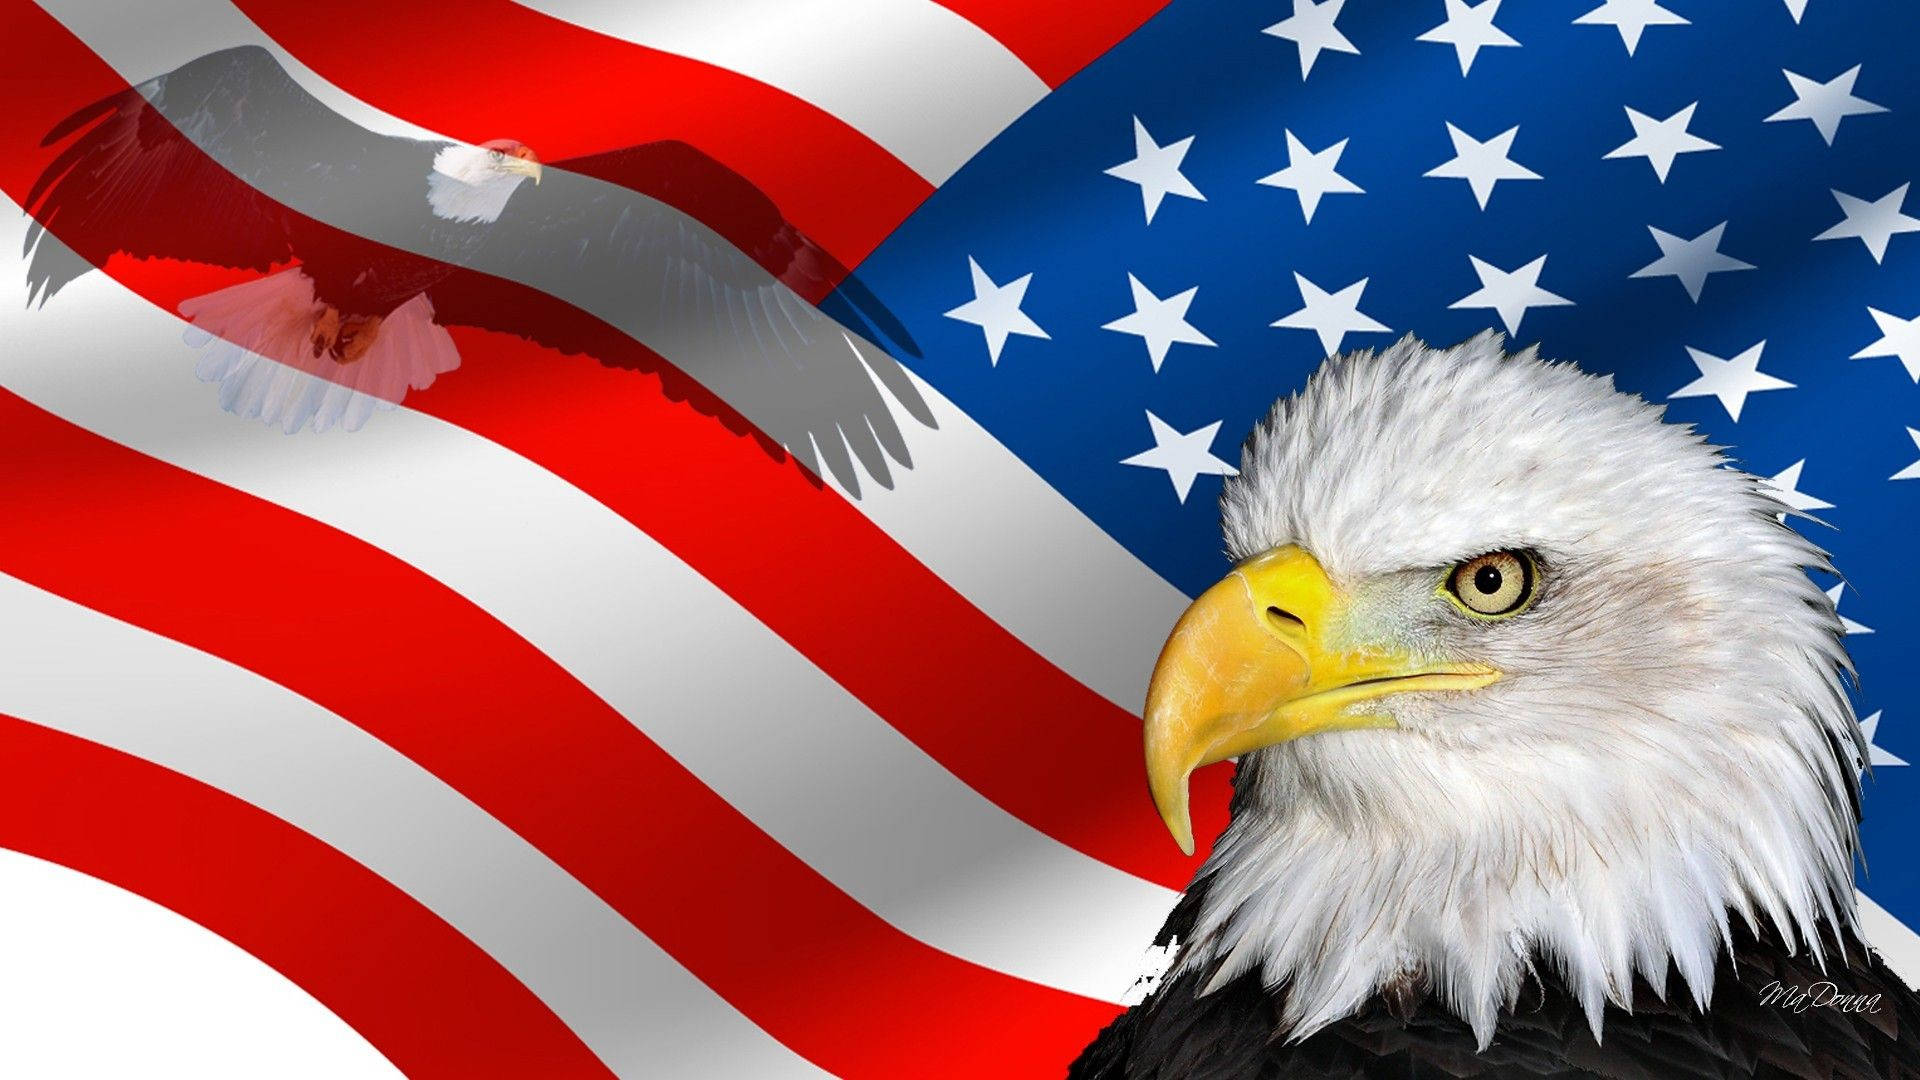 Free Us Eagle Wallpaper Downloads, [100+] Us Eagle Wallpapers for FREE |  